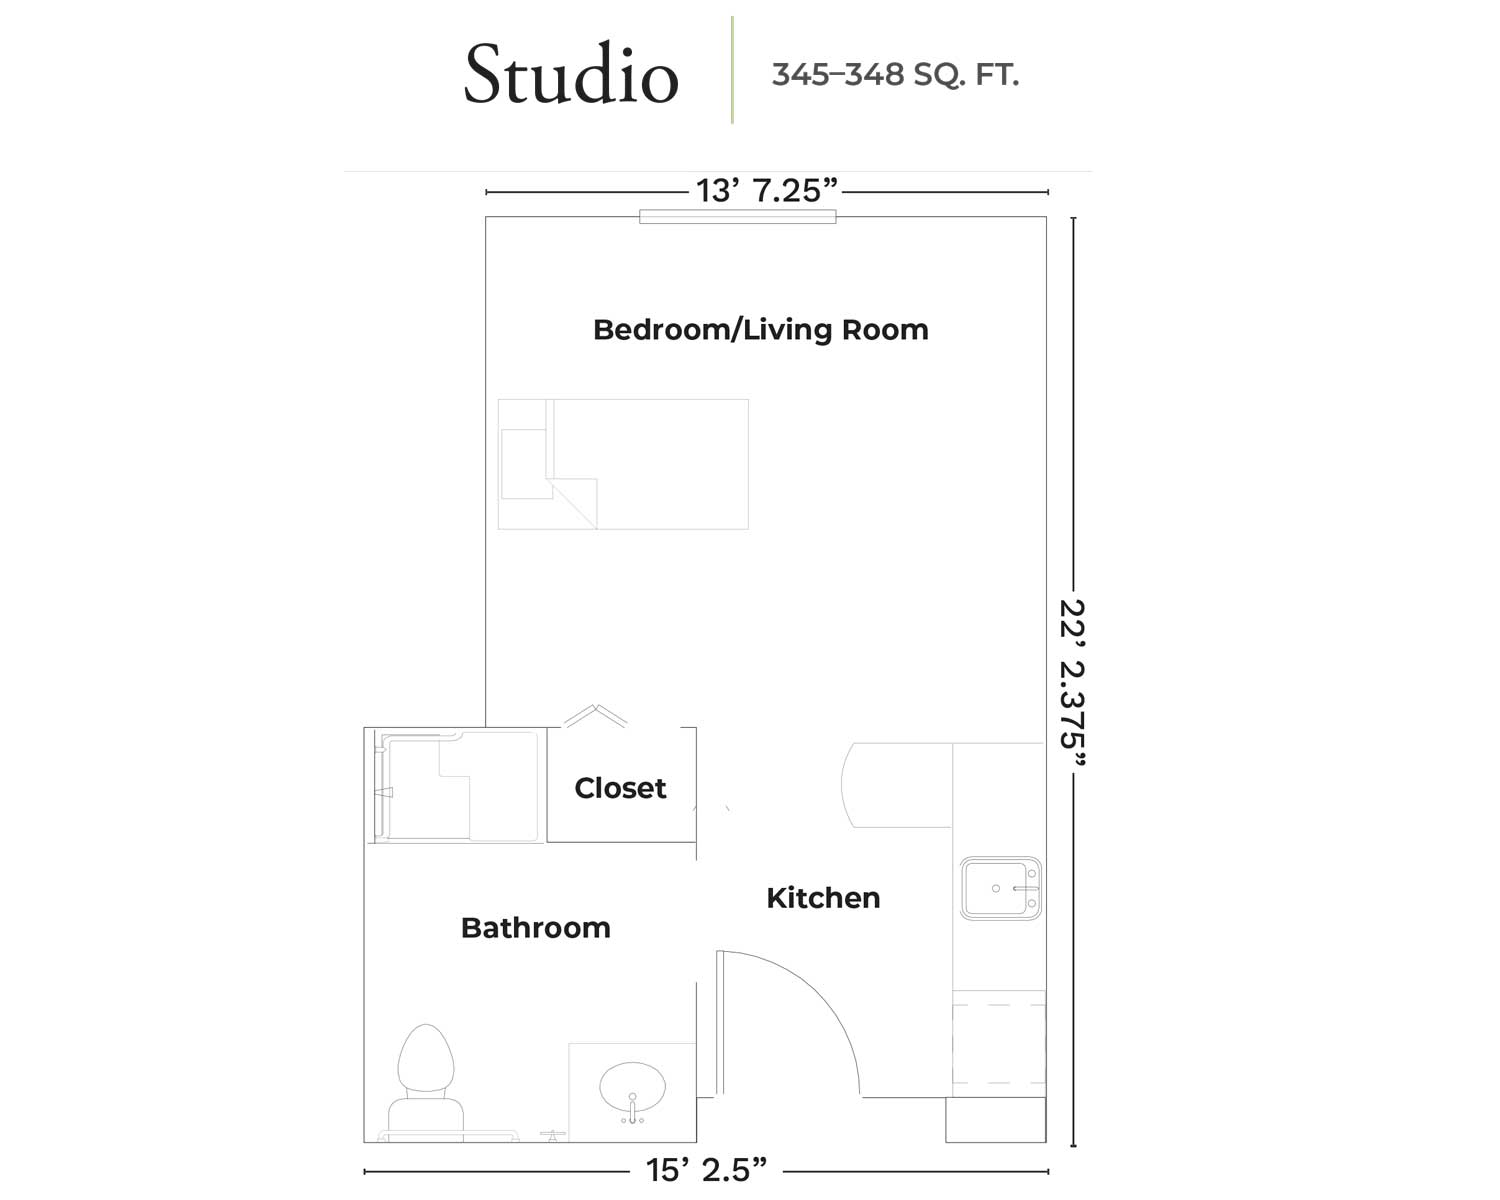 Studio apartment floor plan with bedroom, kitchen, bathroom, and closet areas labeled.